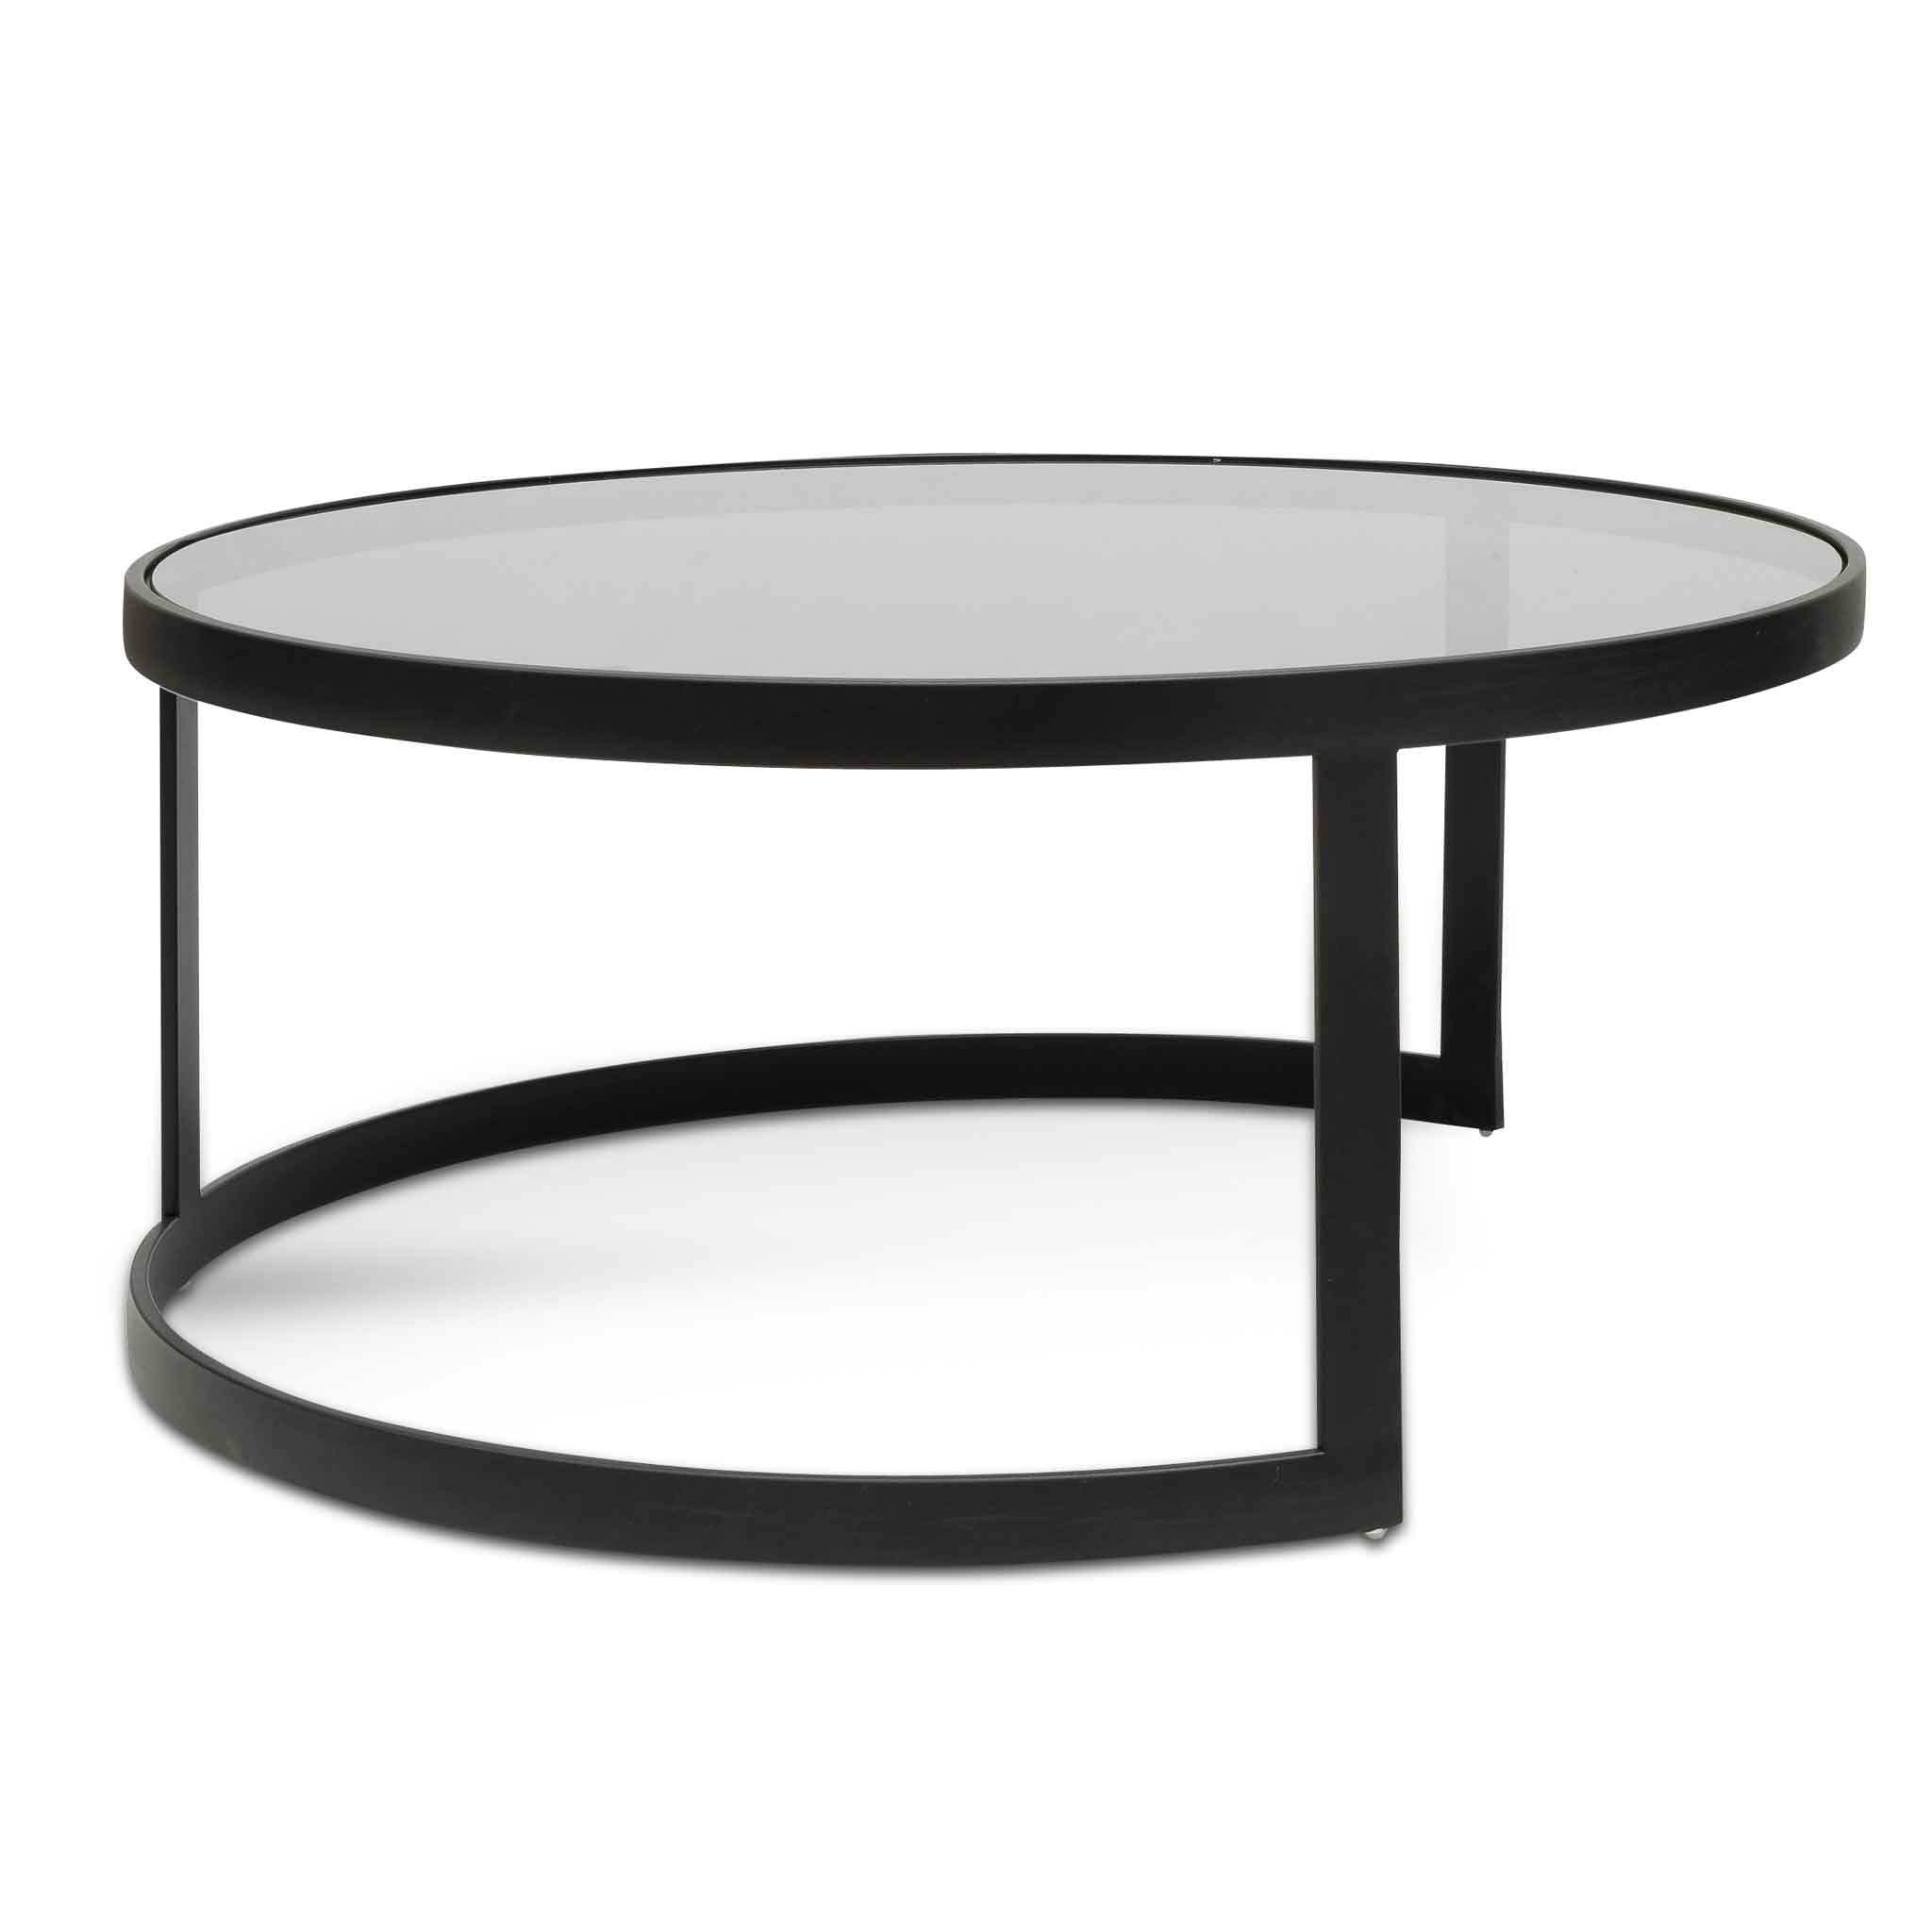 Nested Grey Glass Coffee Table - Black Base_7